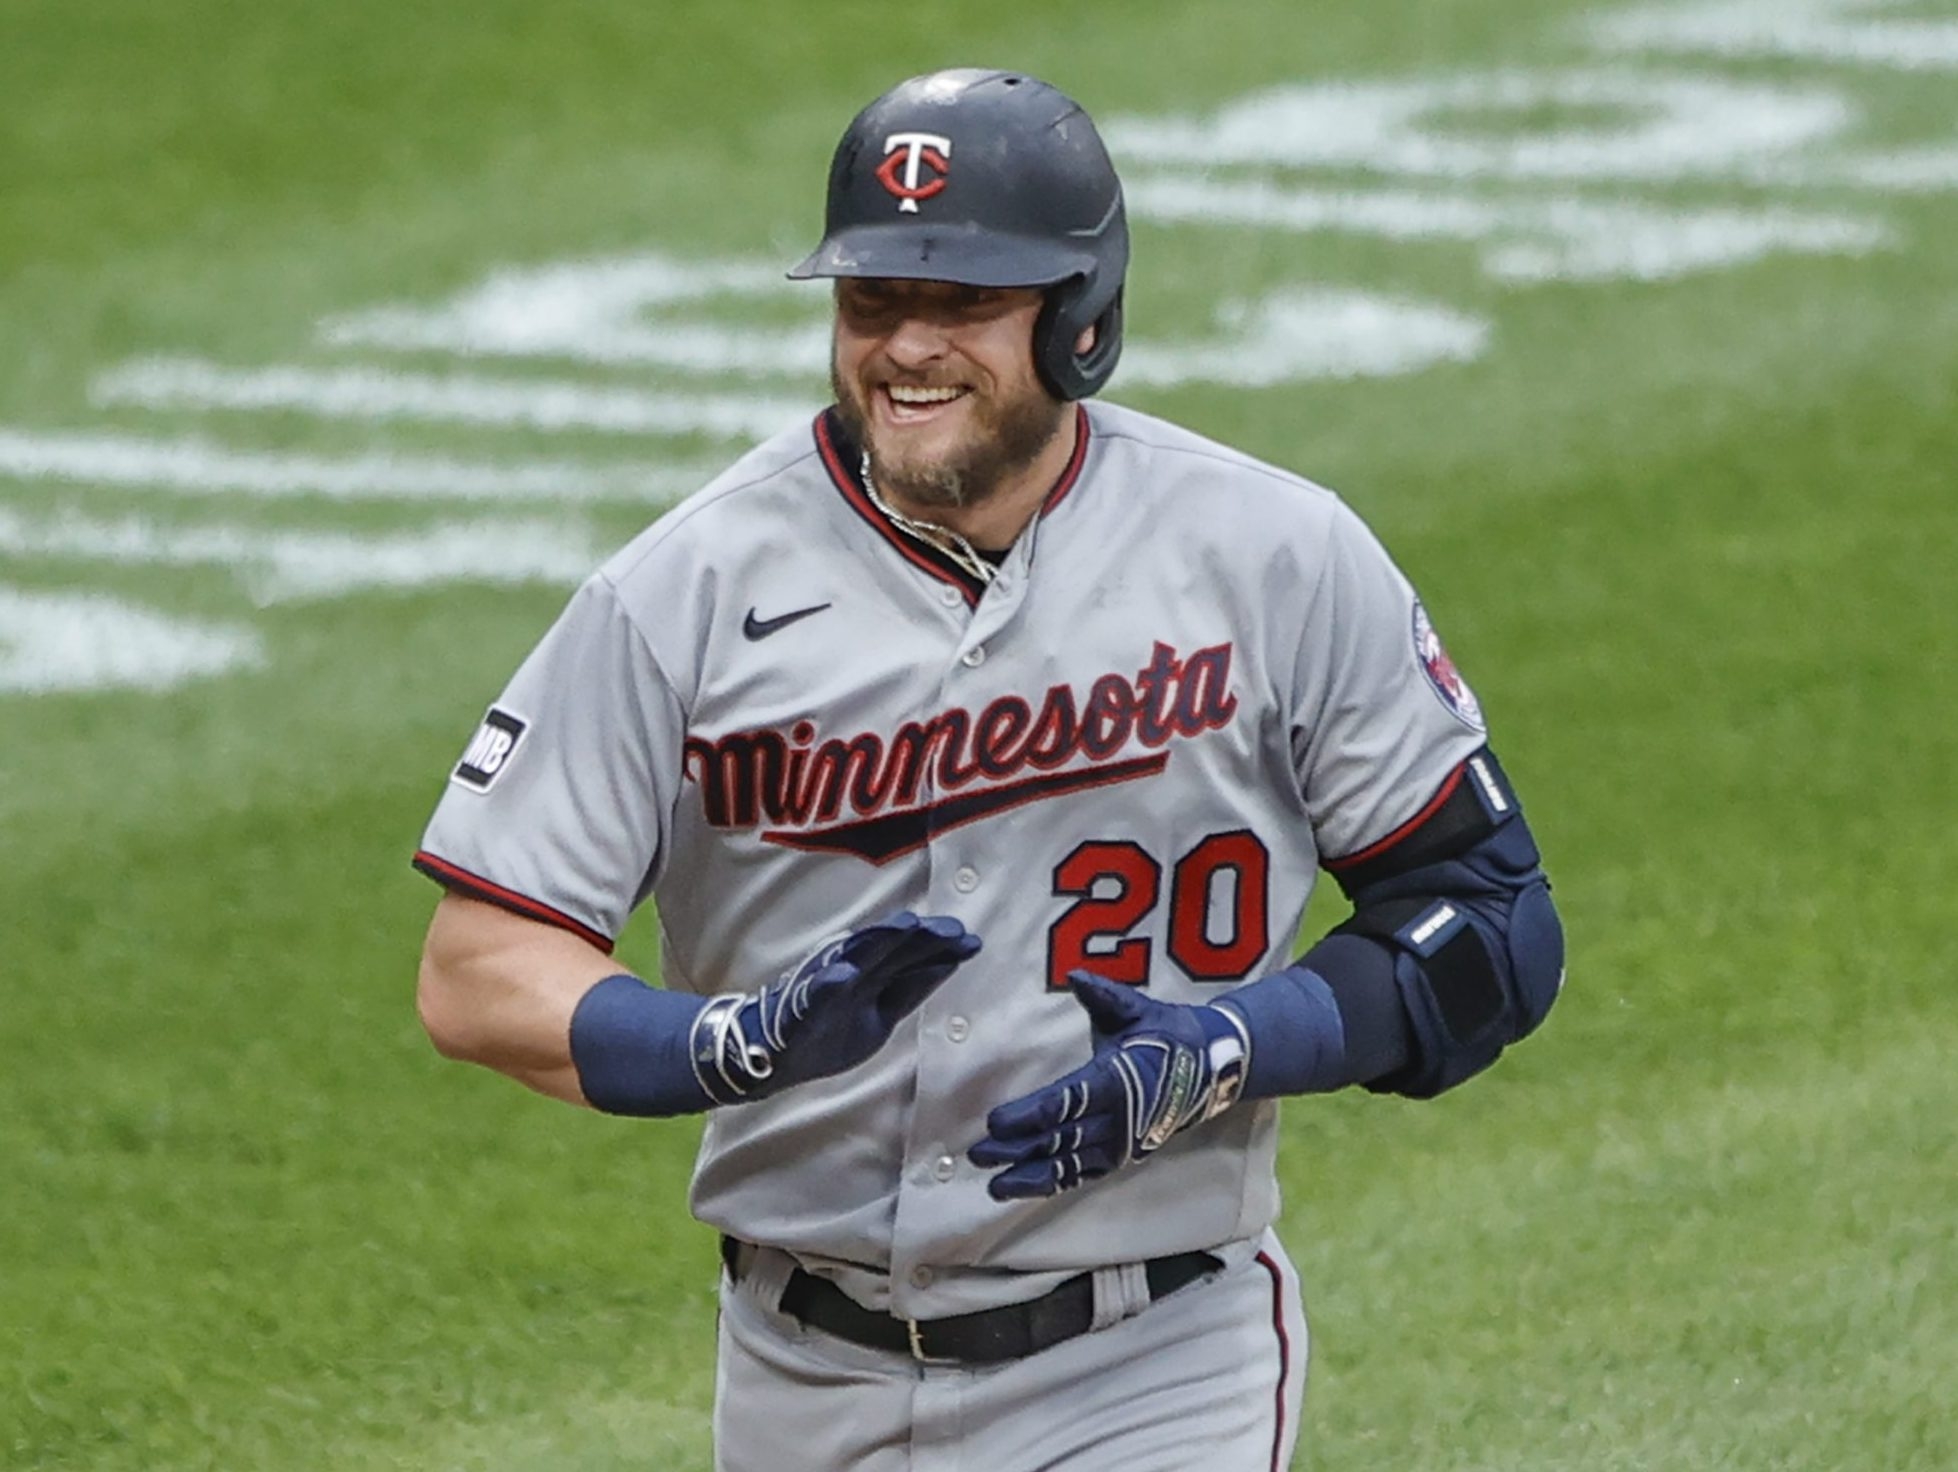 Yankees pull off big trade with Twins, acquire Josh Donaldson